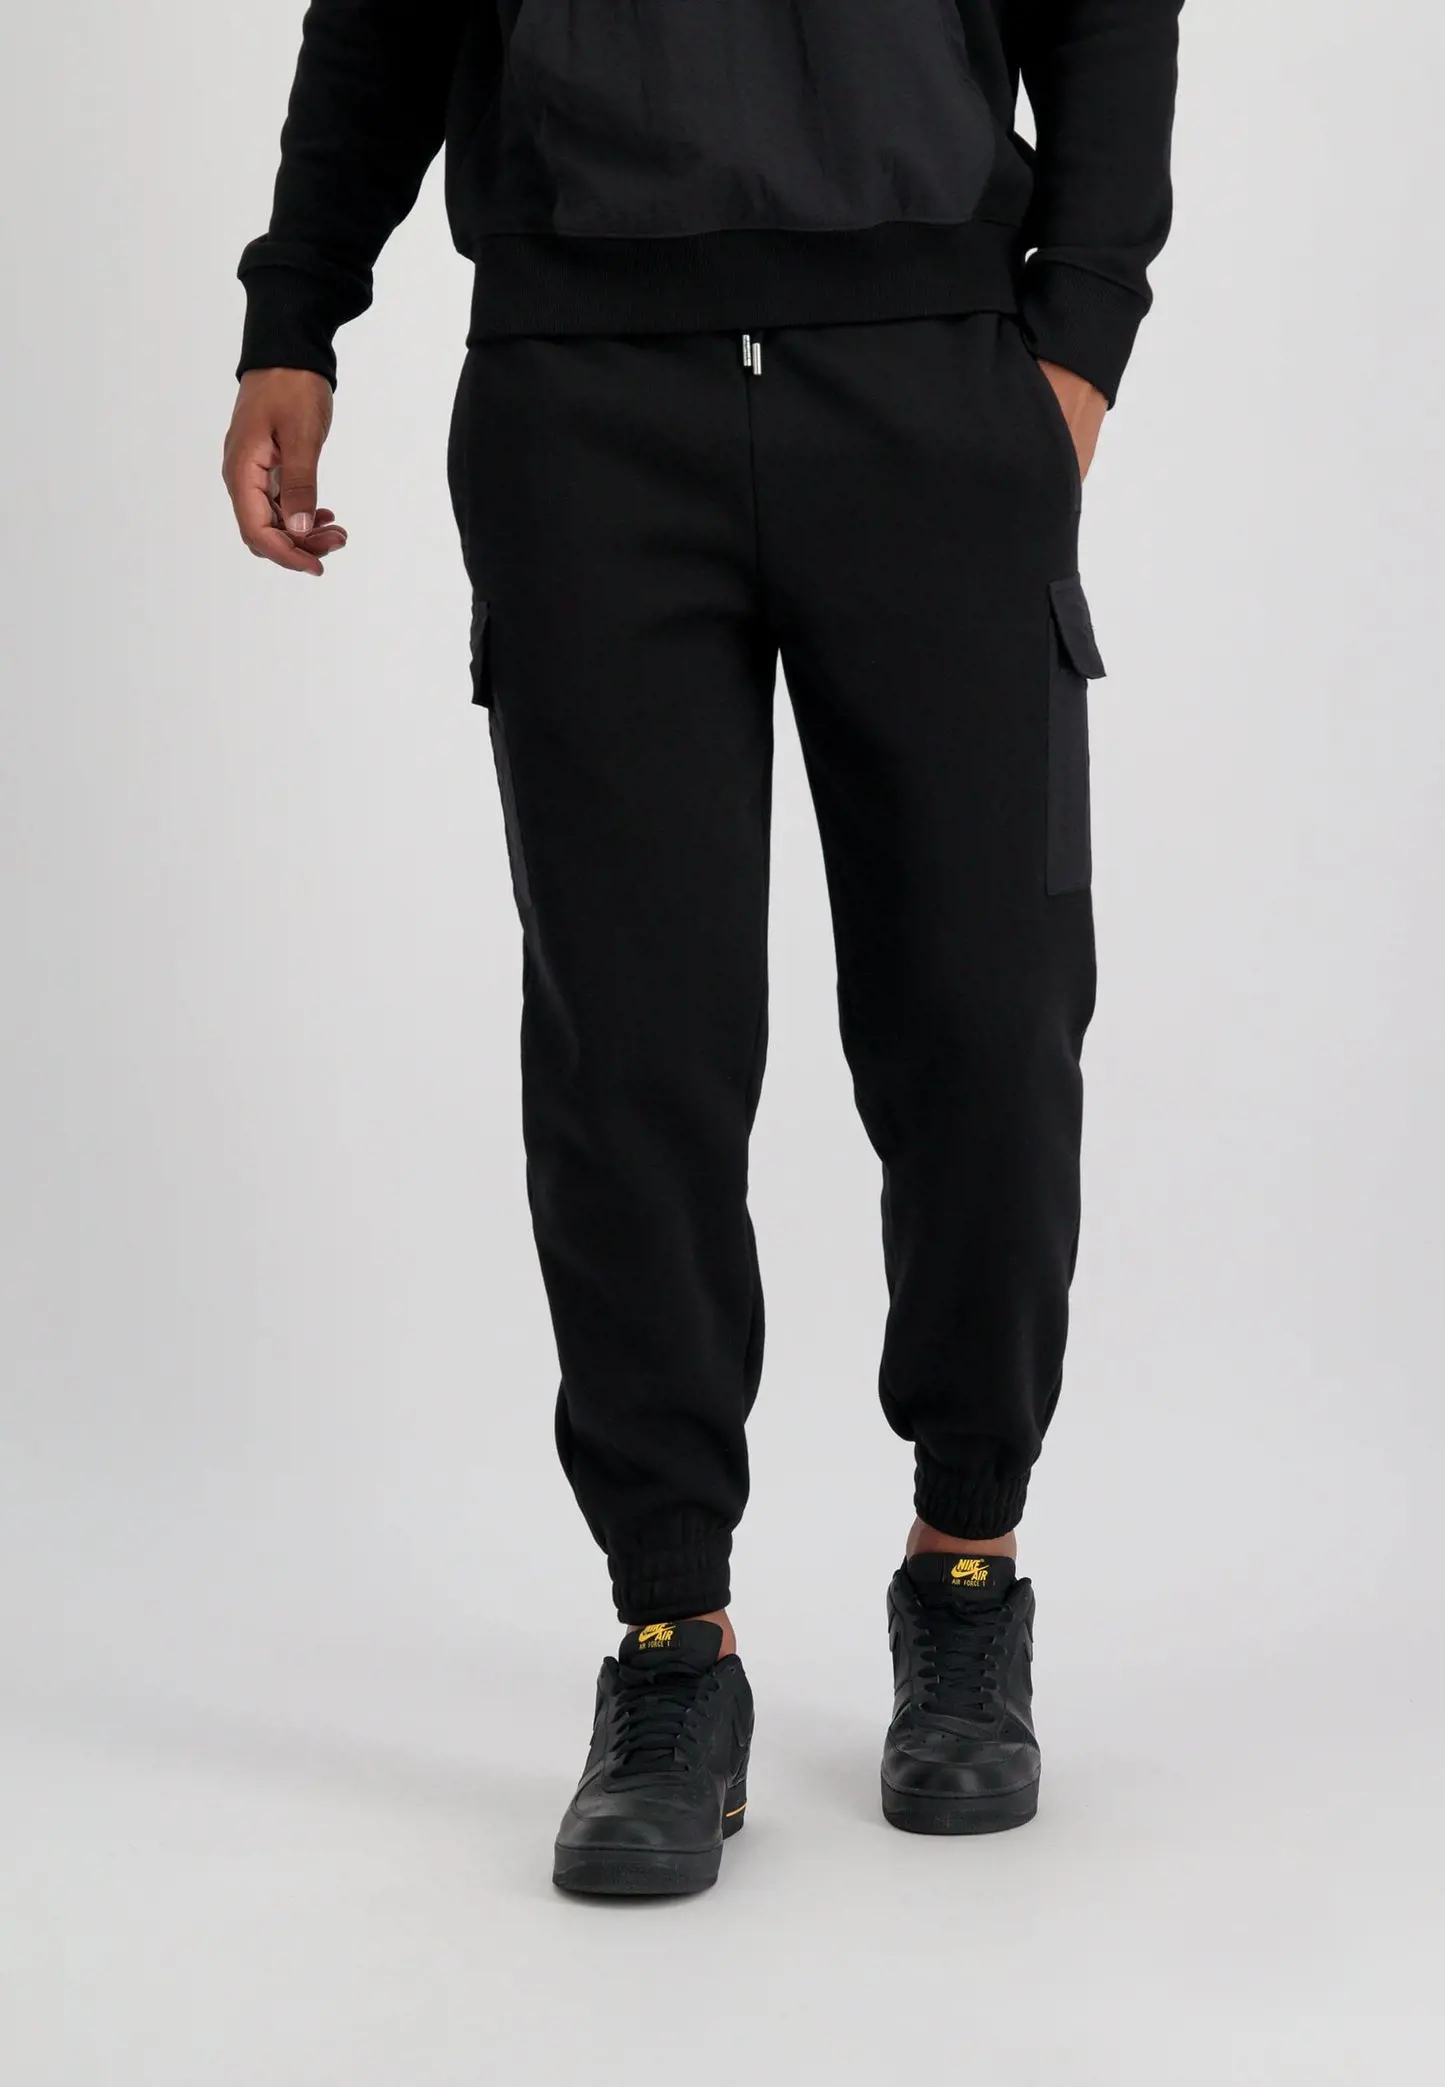 A Guide To Styling The Trendy Aape Army Jogger Pants | ShunVogue